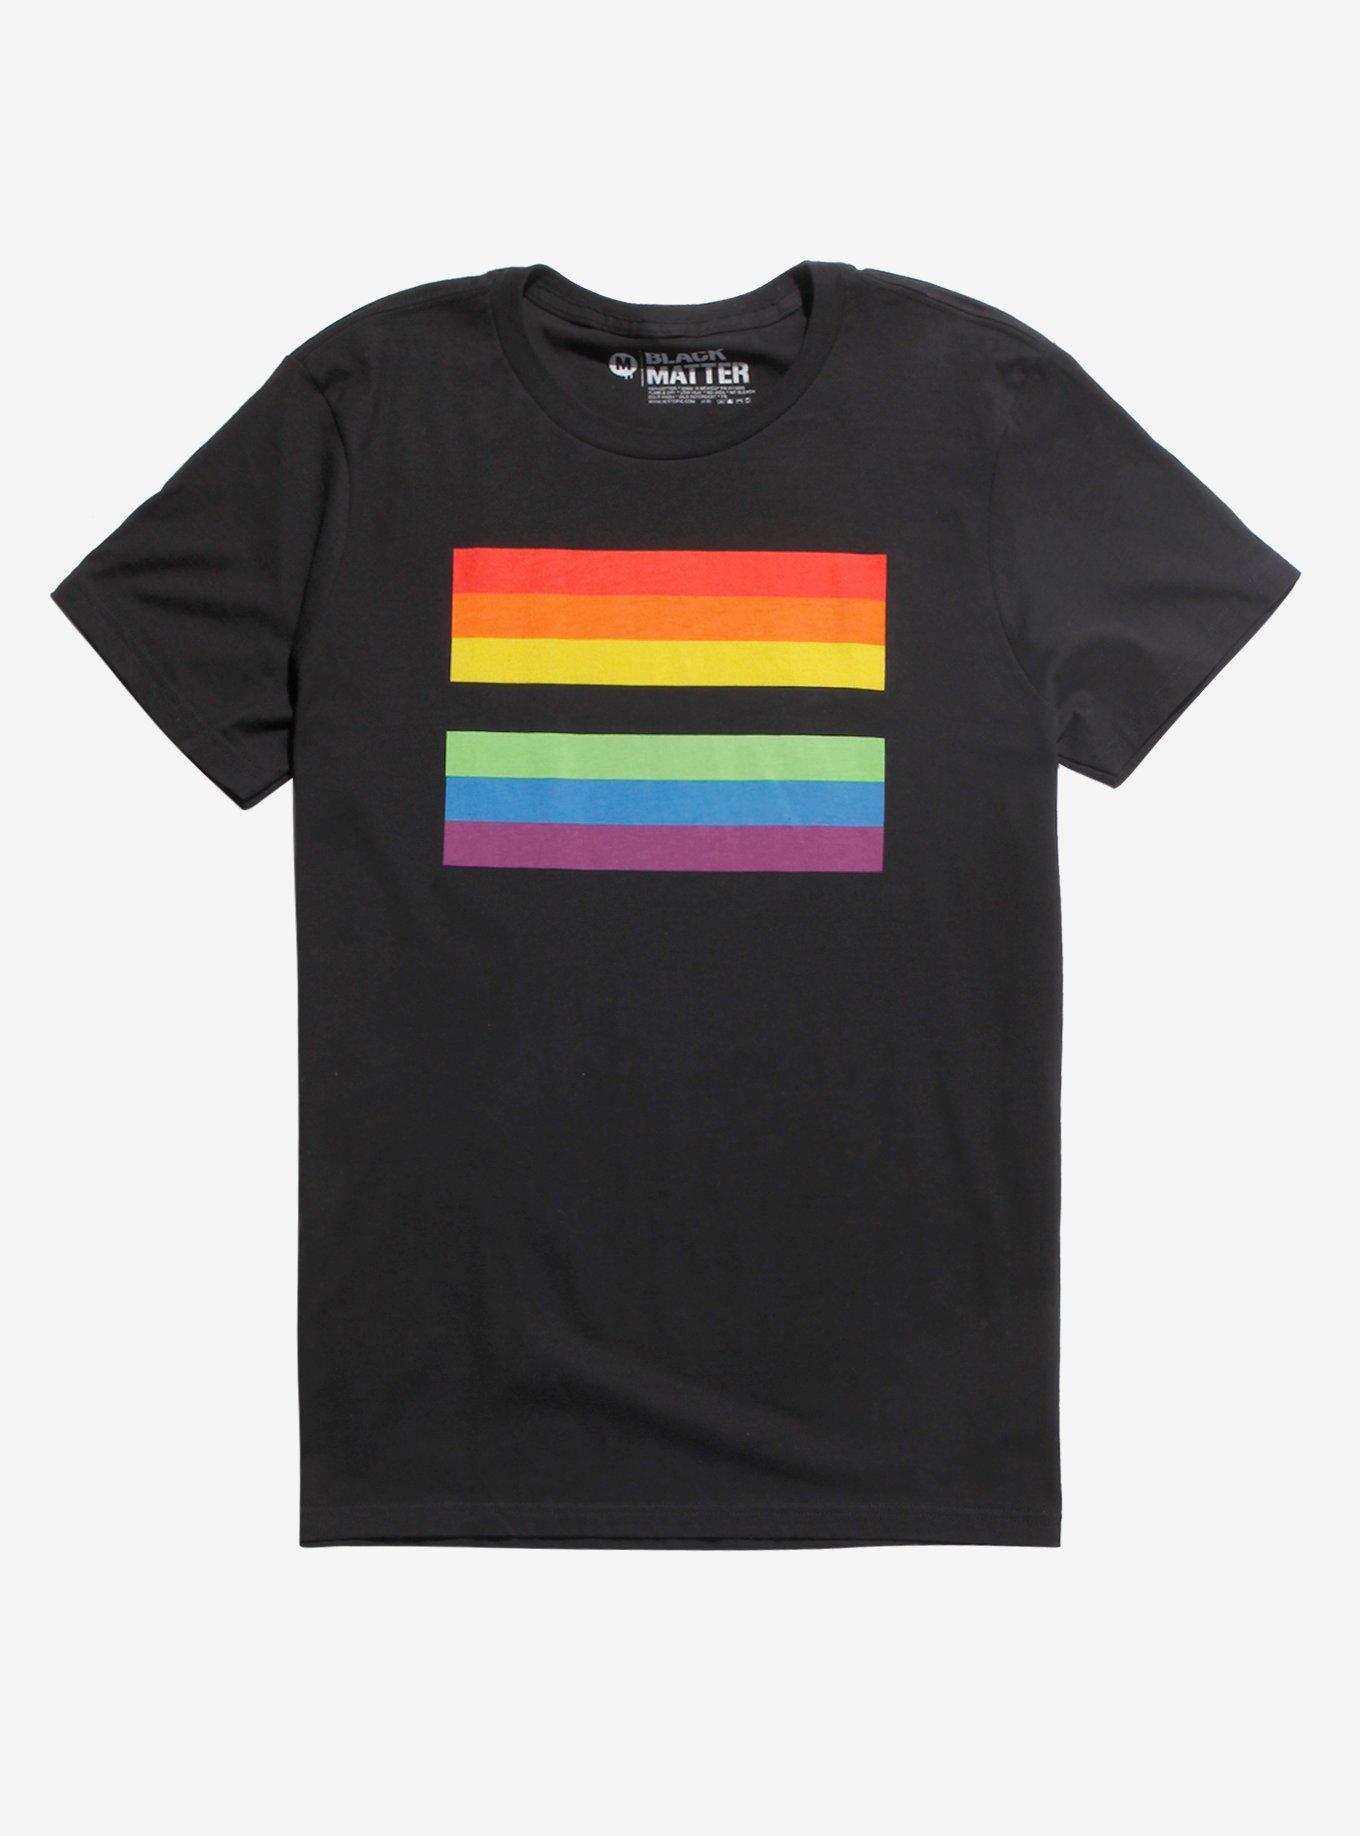 Pride Rainbow Equality T-Shirt Hot Topic Exclusive, MULTI, hi-res